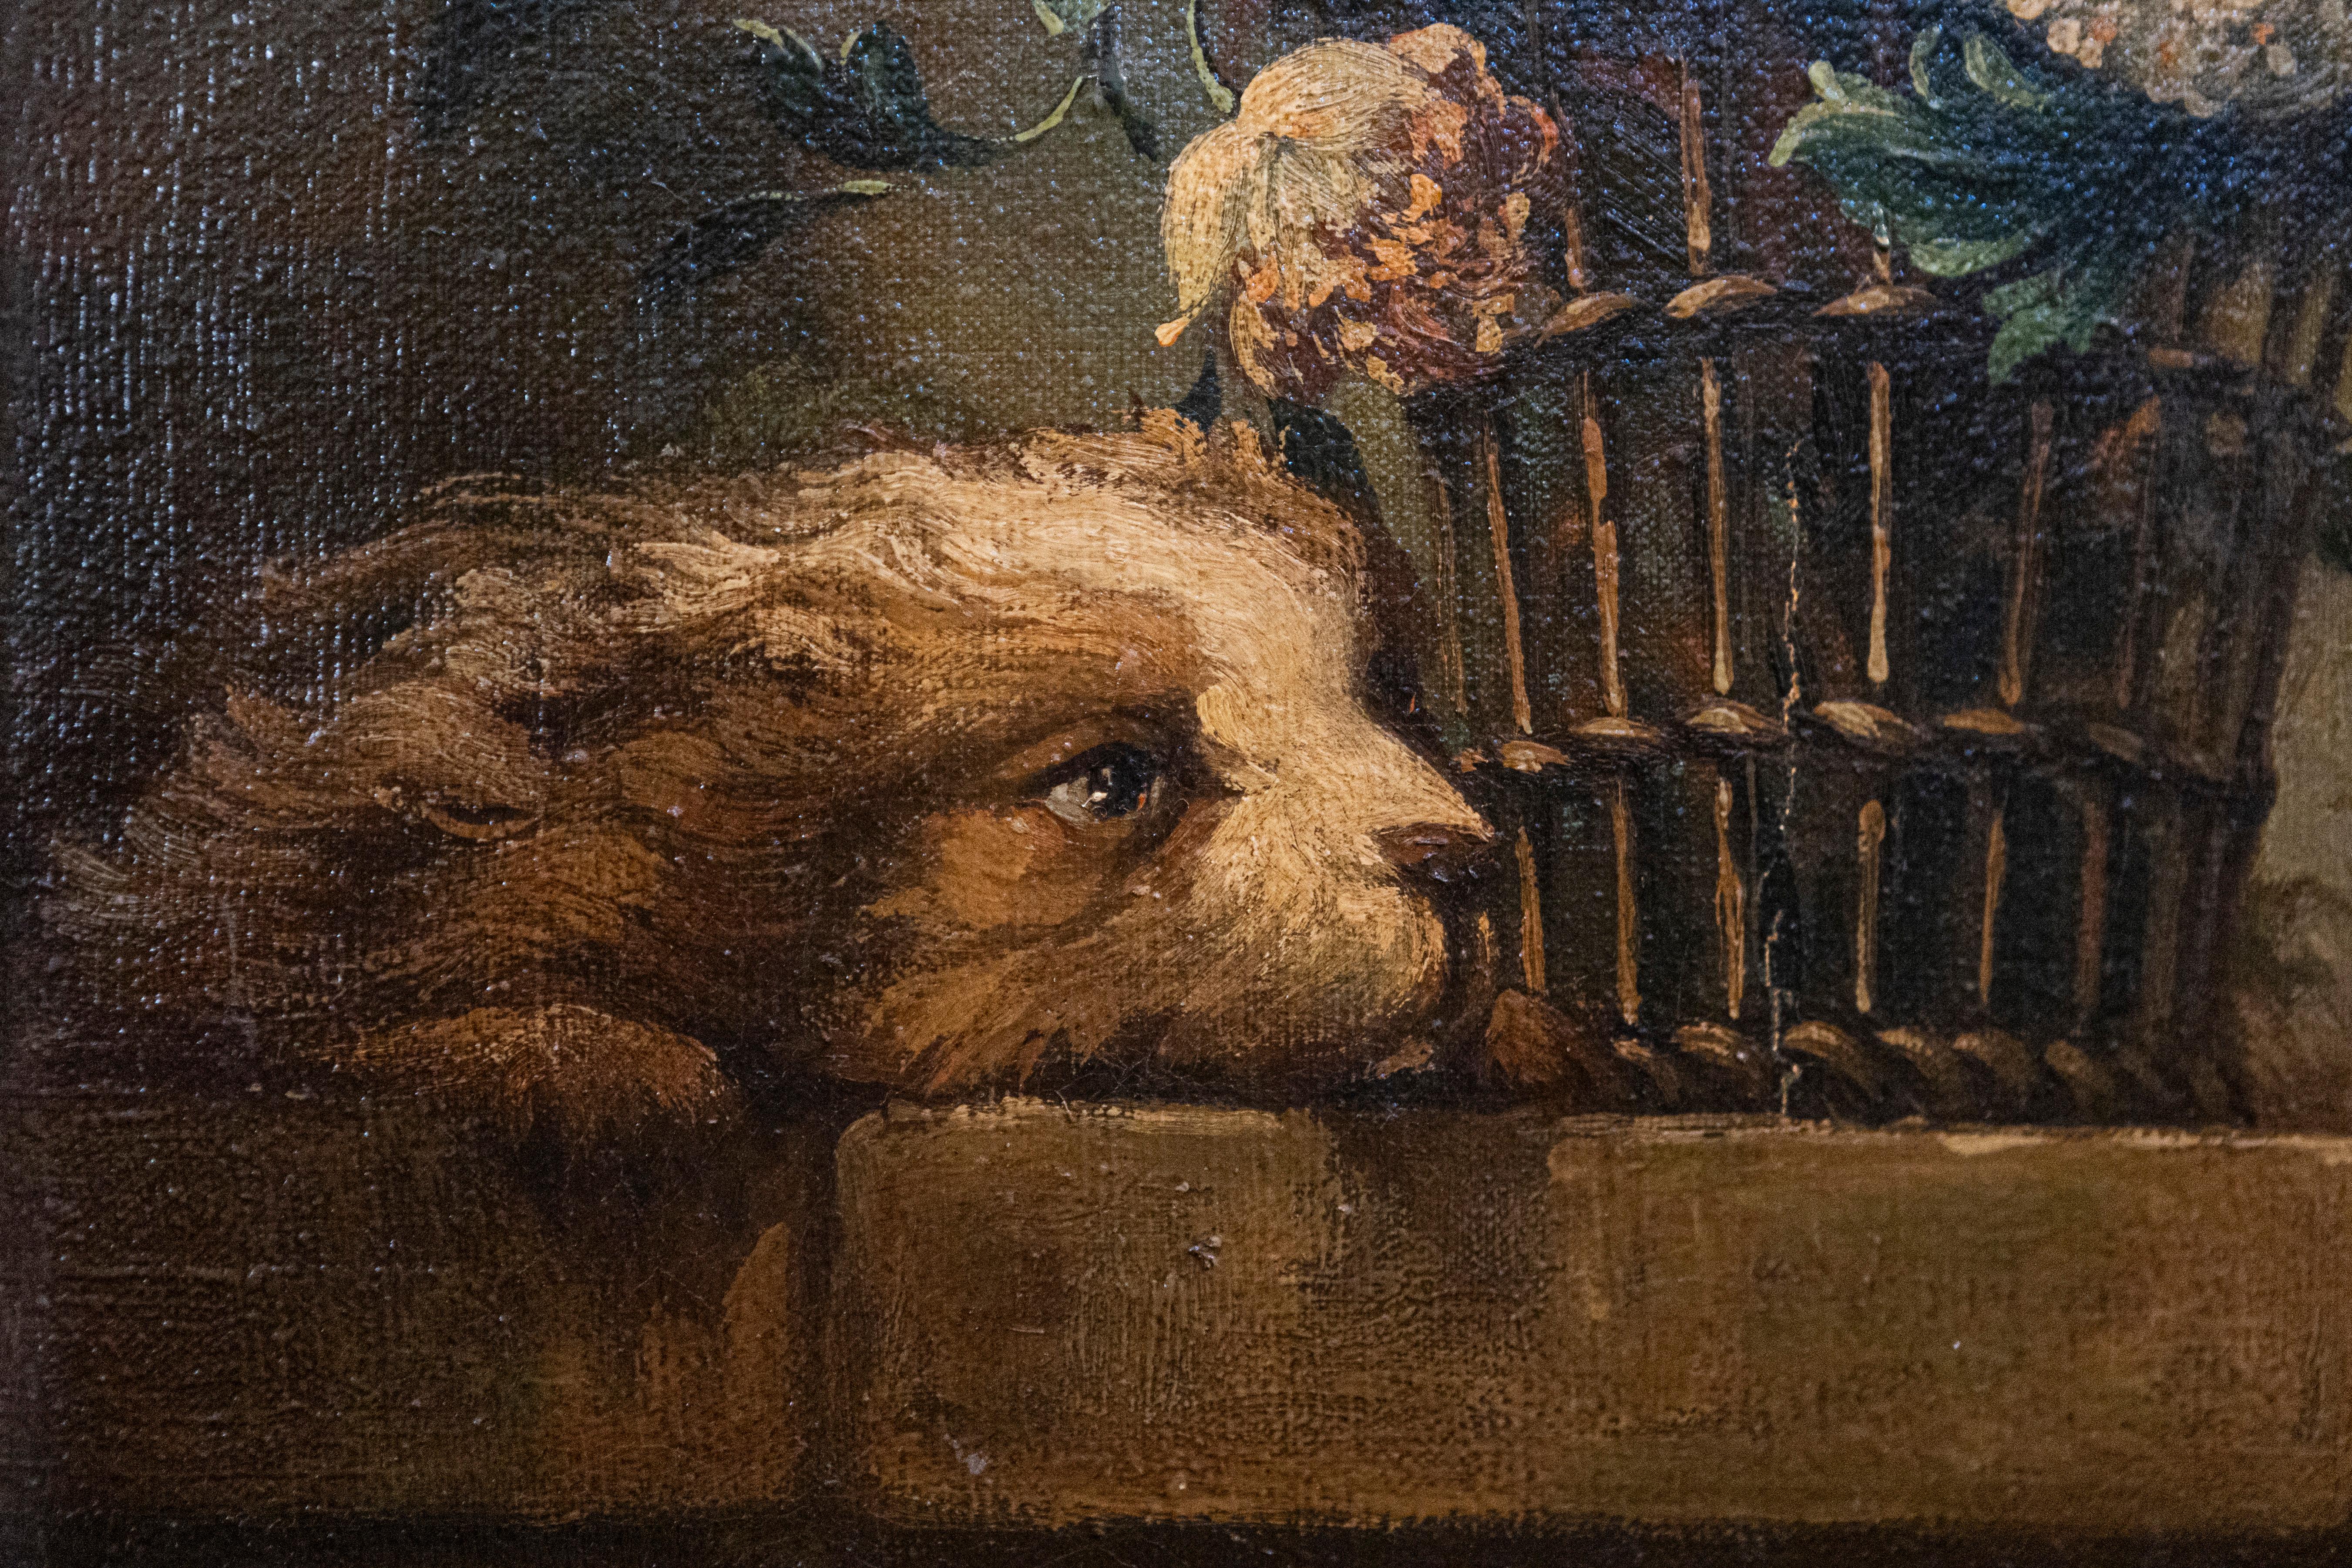 French 19th Century Framed Still-life Floral Painting with Dog and Rabbit Motifs In Good Condition For Sale In Atlanta, GA